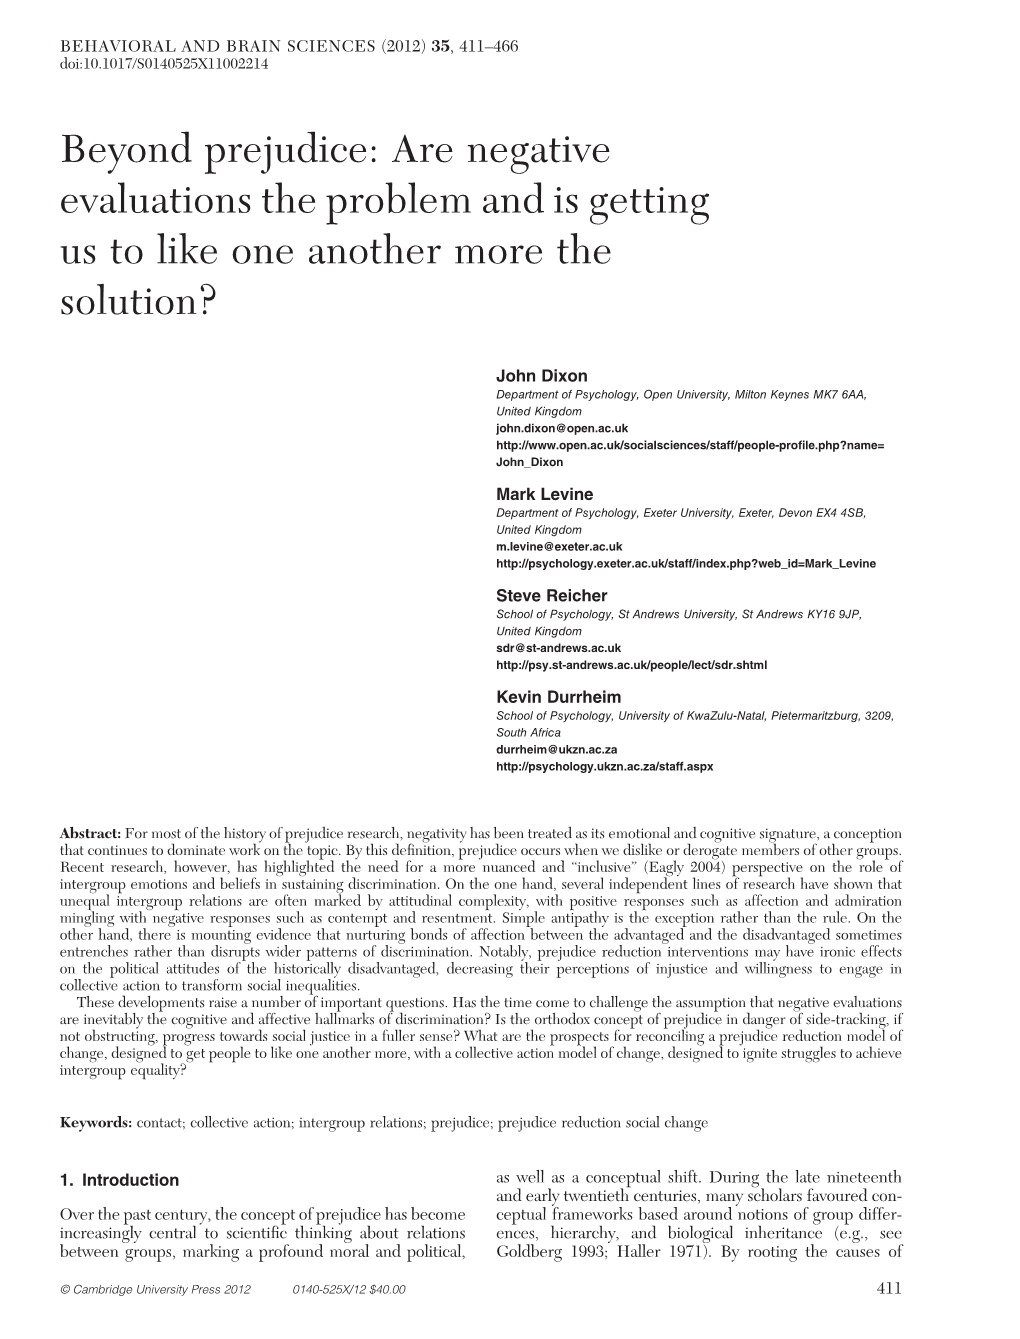 Beyond Prejudice: Are Negative Evaluations the Problem and Is Getting Us to Like One Another More the Solution?